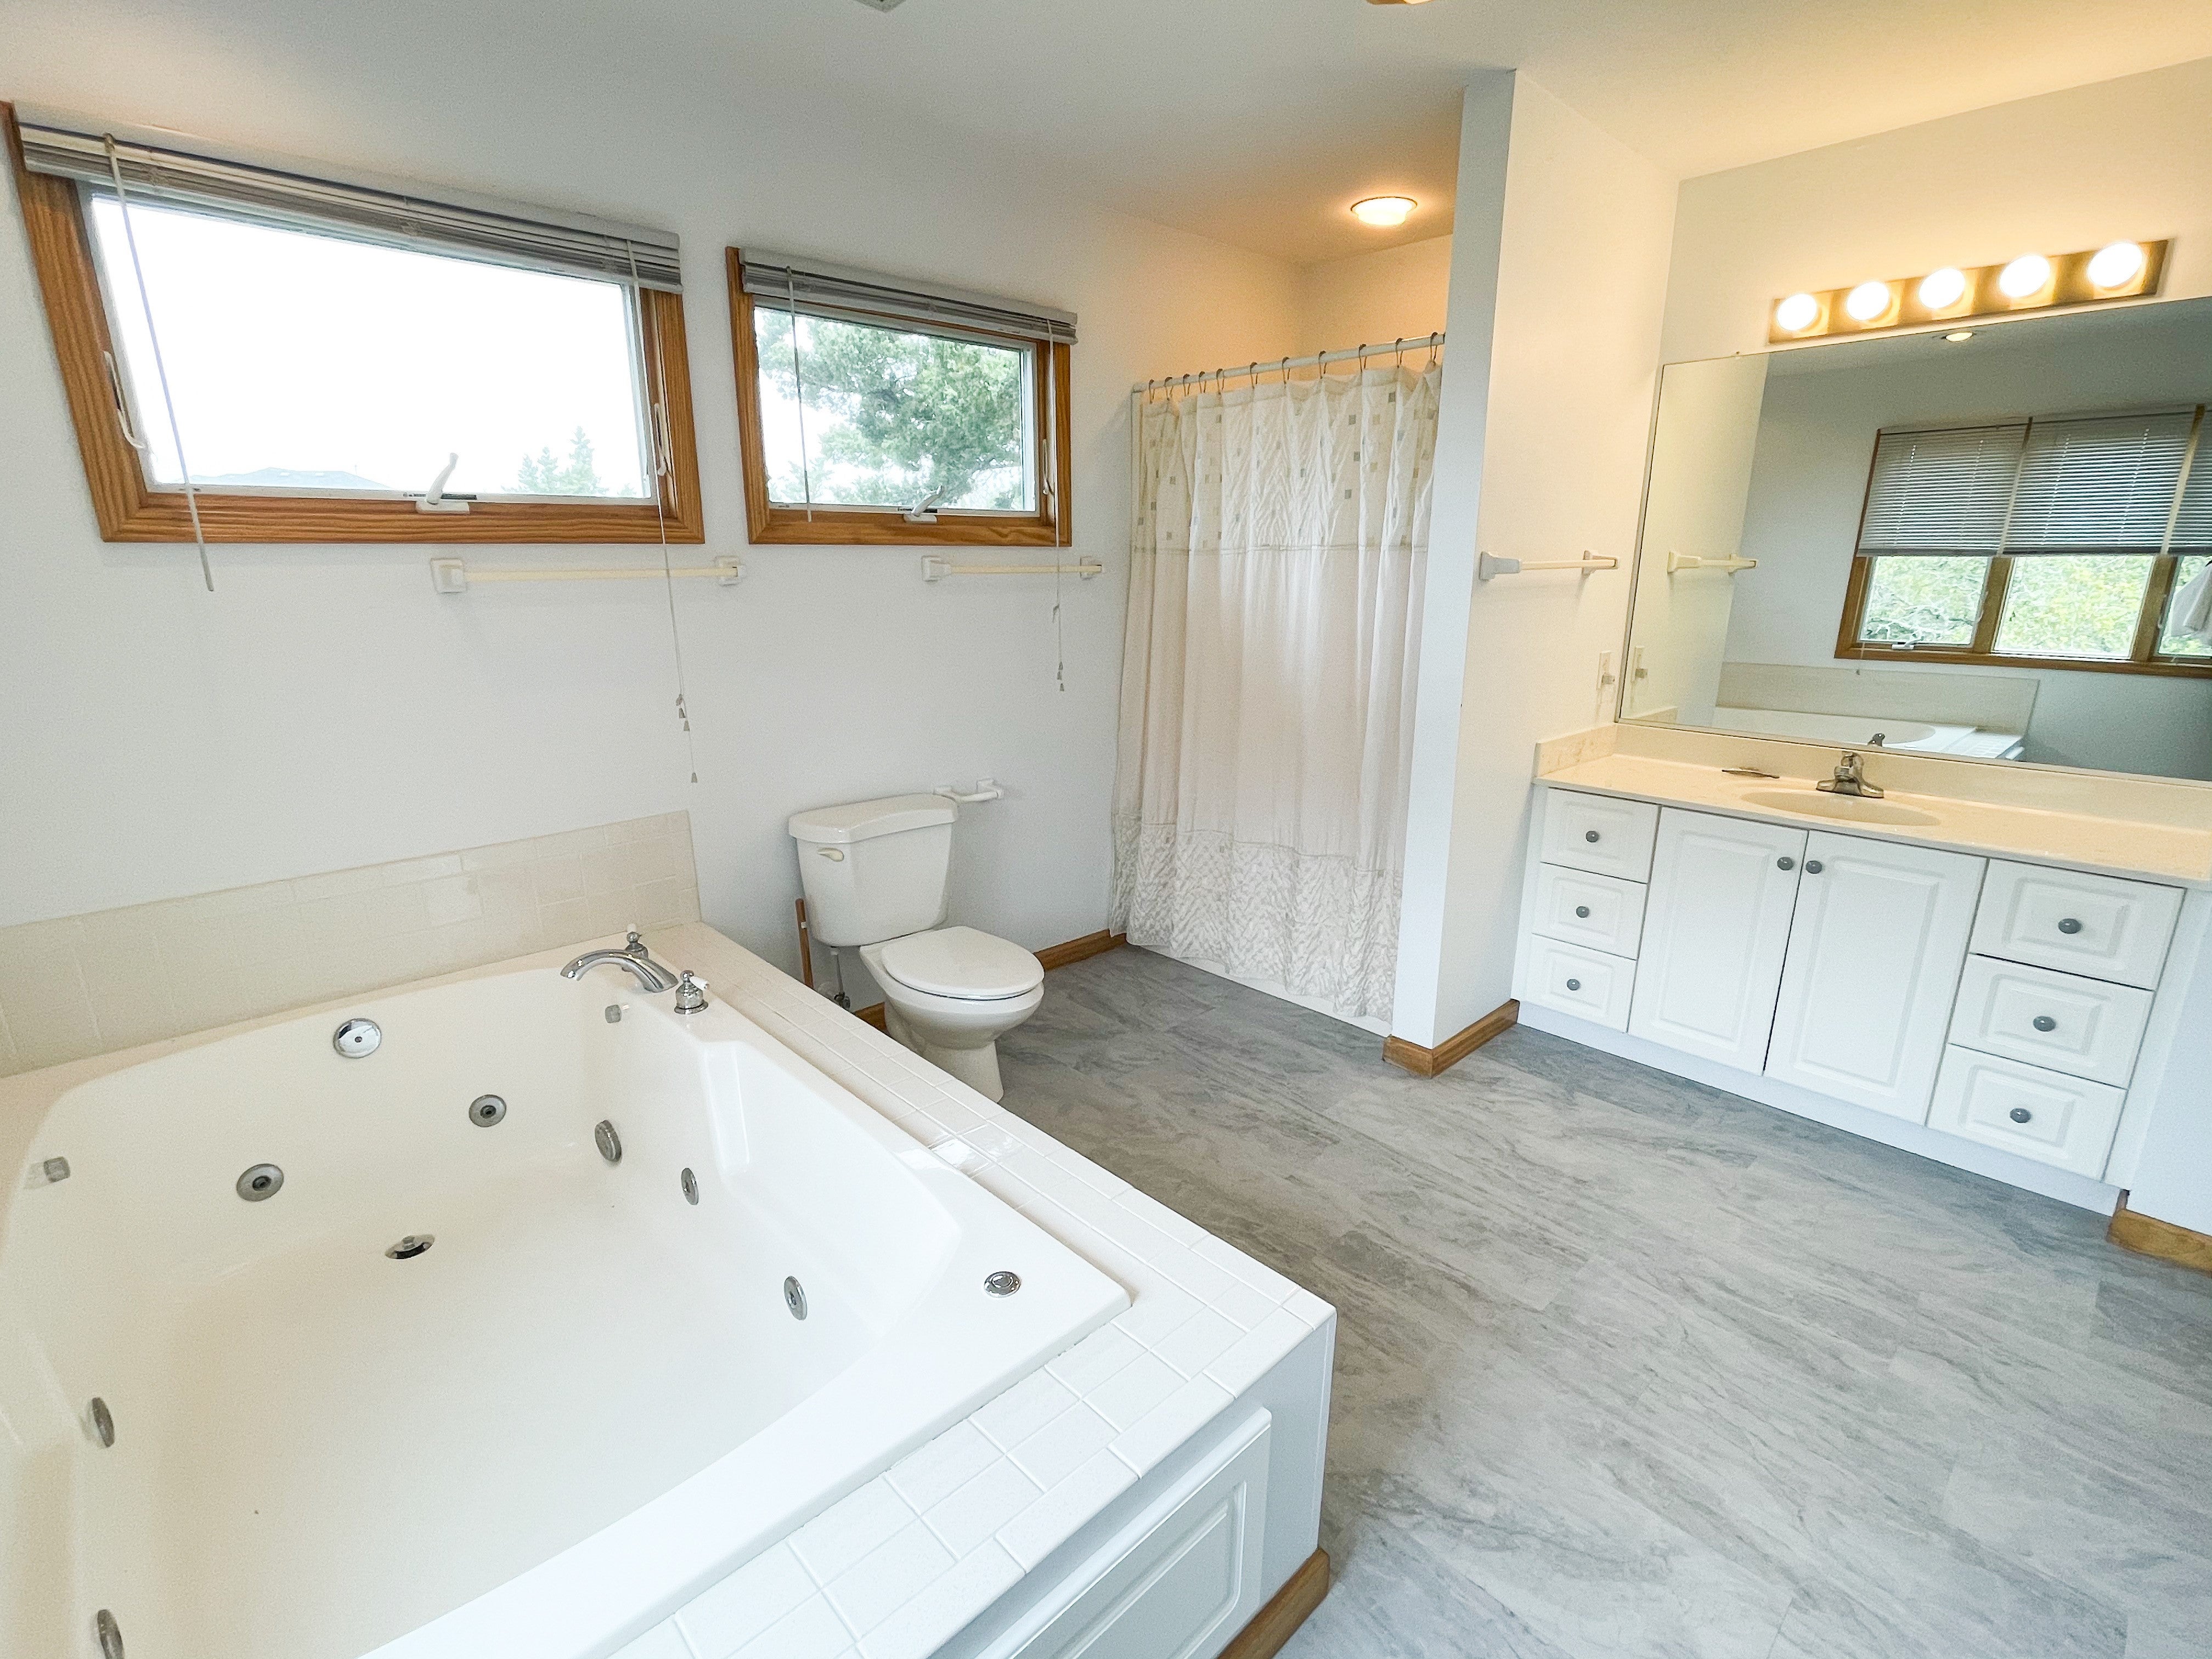 Primary Bath with Shower Stall and Whirlpool Tub, Second Floor